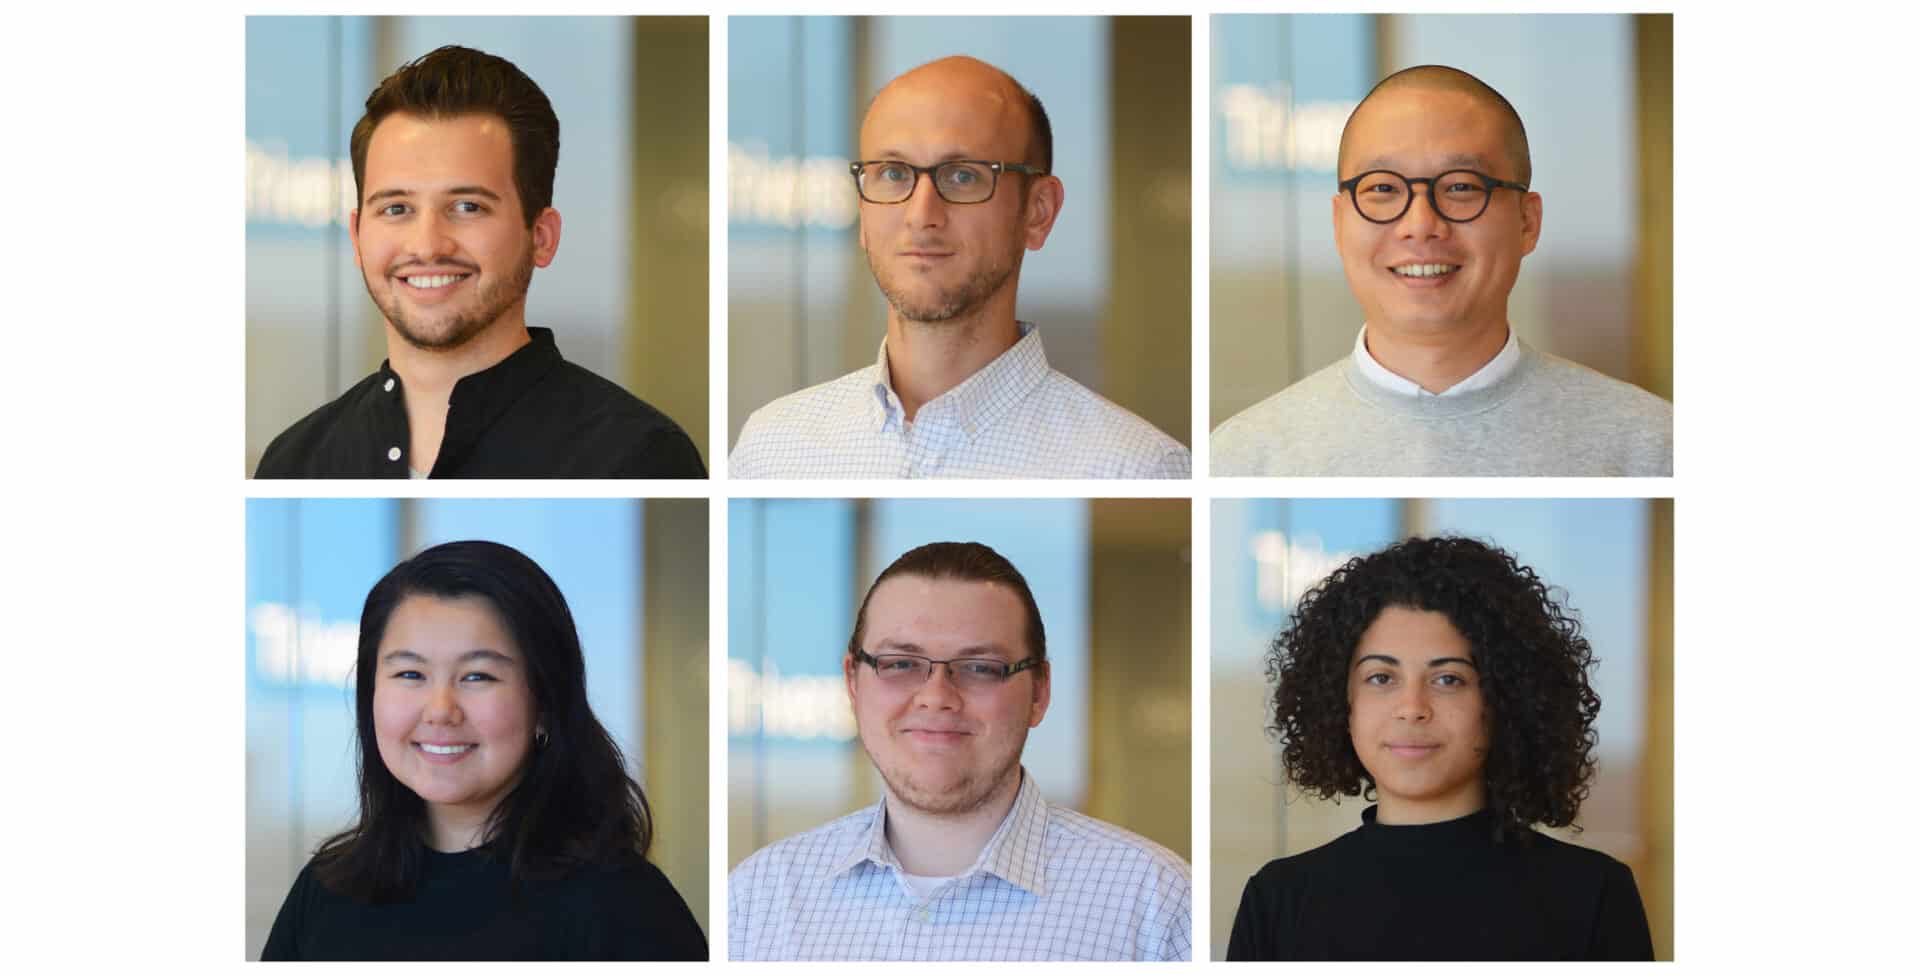 Headshots of New Employees at Trivers Architectural Firm